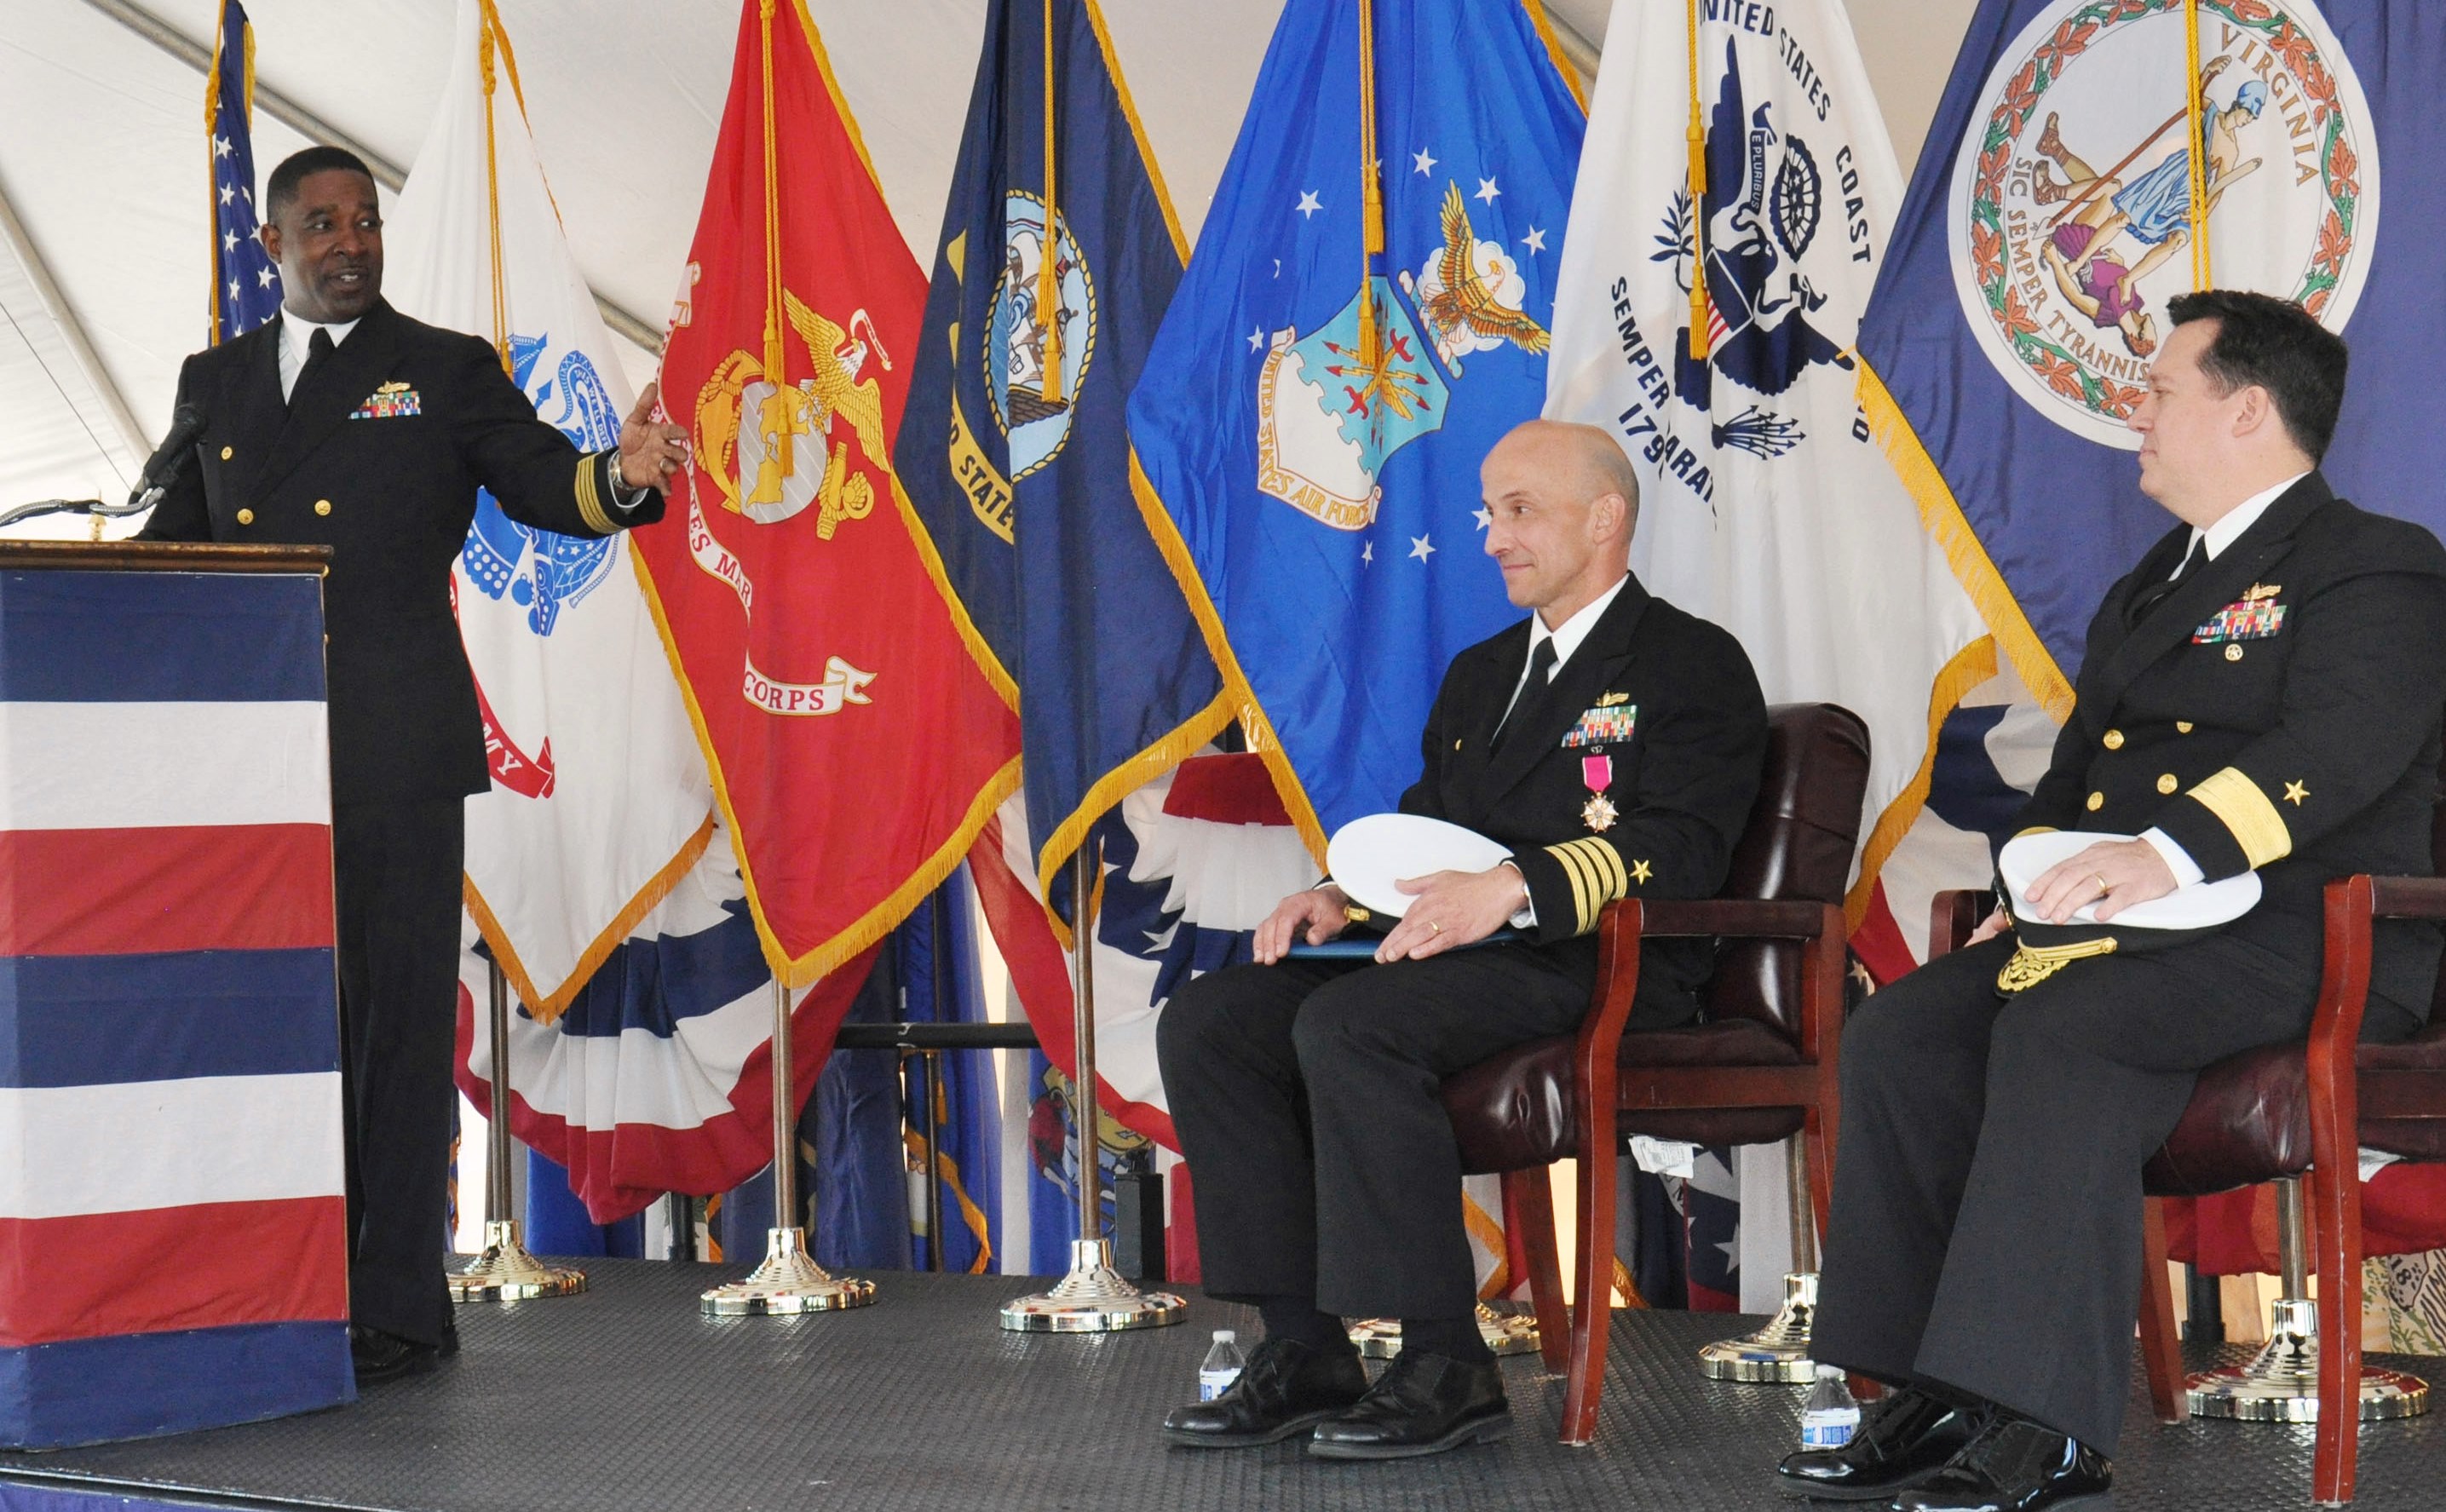 DAHLGREN, Va. (Nov. 18, 2016) - Capt. Godfrey Weekes, incoming commanding officer of Naval Surface Warfare Center Dahlgren Division (NSWCDD), thanks Capt. Brian Durant, center, outgoing NSWCDD commanding officer, during a change of command ceremony held at Naval Support Facility Dahlgren. Rear Adm. Tom Druggan, commander of the Naval Surface Warfare Center, right, was the ceremony's guest speaker. NSWCDD's mission is to provide research, development, test and evaluation, analysis, systems engineering, integration and certification of complex naval warfare systems related to surface warfare and strategic systems as well as combat and weapons systems associated with surface warfare. The command also provides system integration and certification for weapons, combat systems, and warfare systems. U.S. Navy photo by Andrew Revelos.